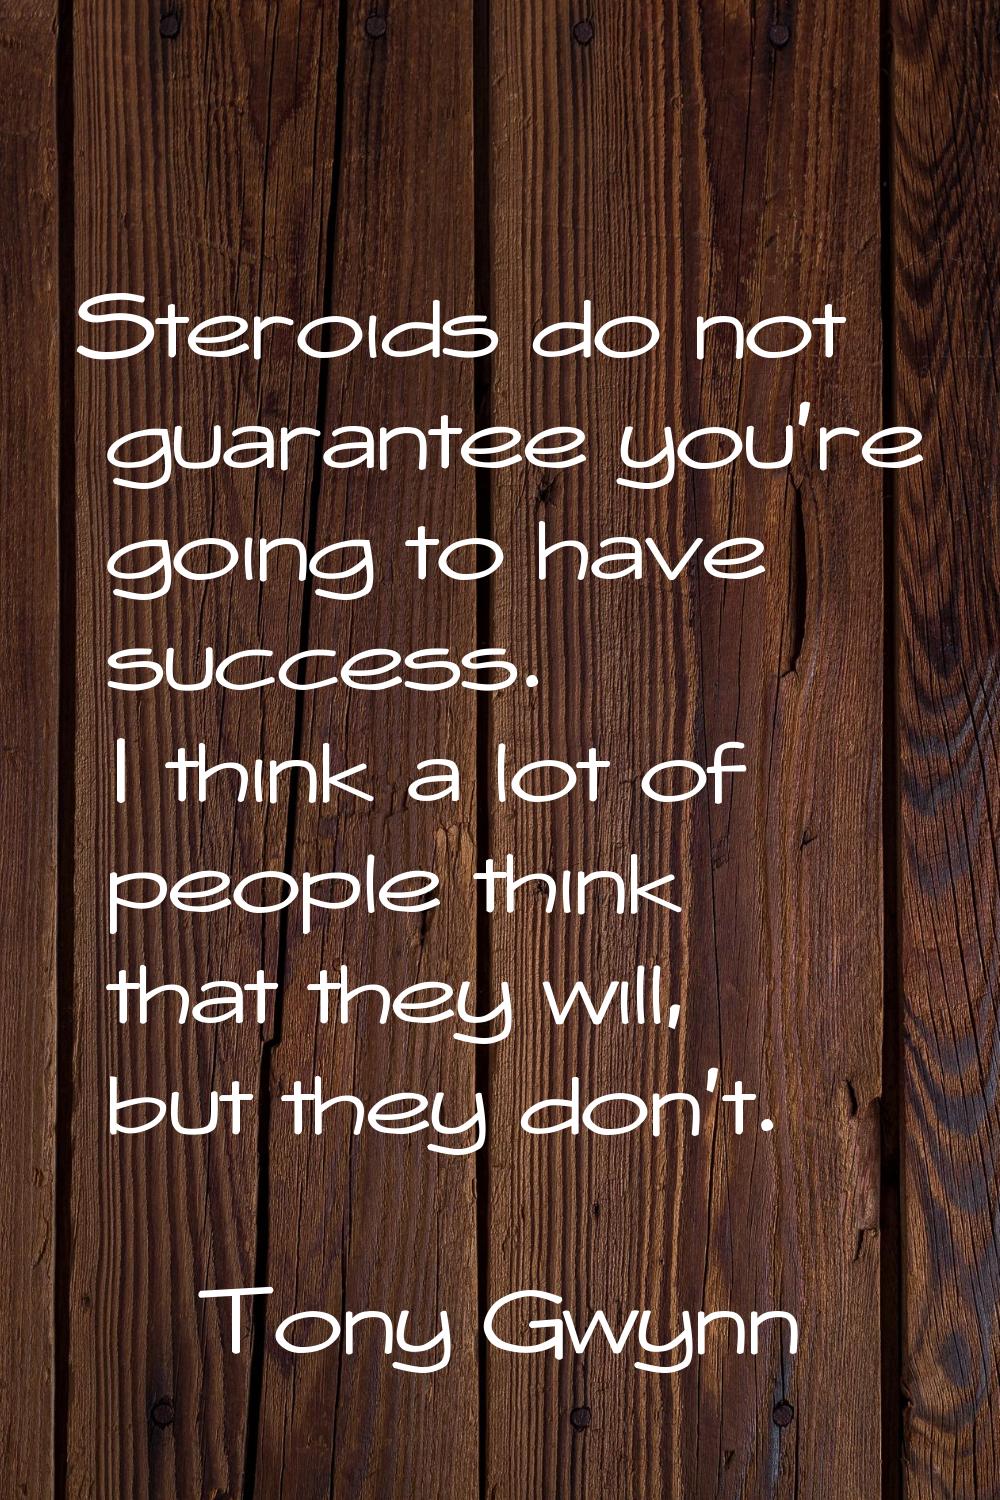 Steroids do not guarantee you're going to have success. I think a lot of people think that they wil